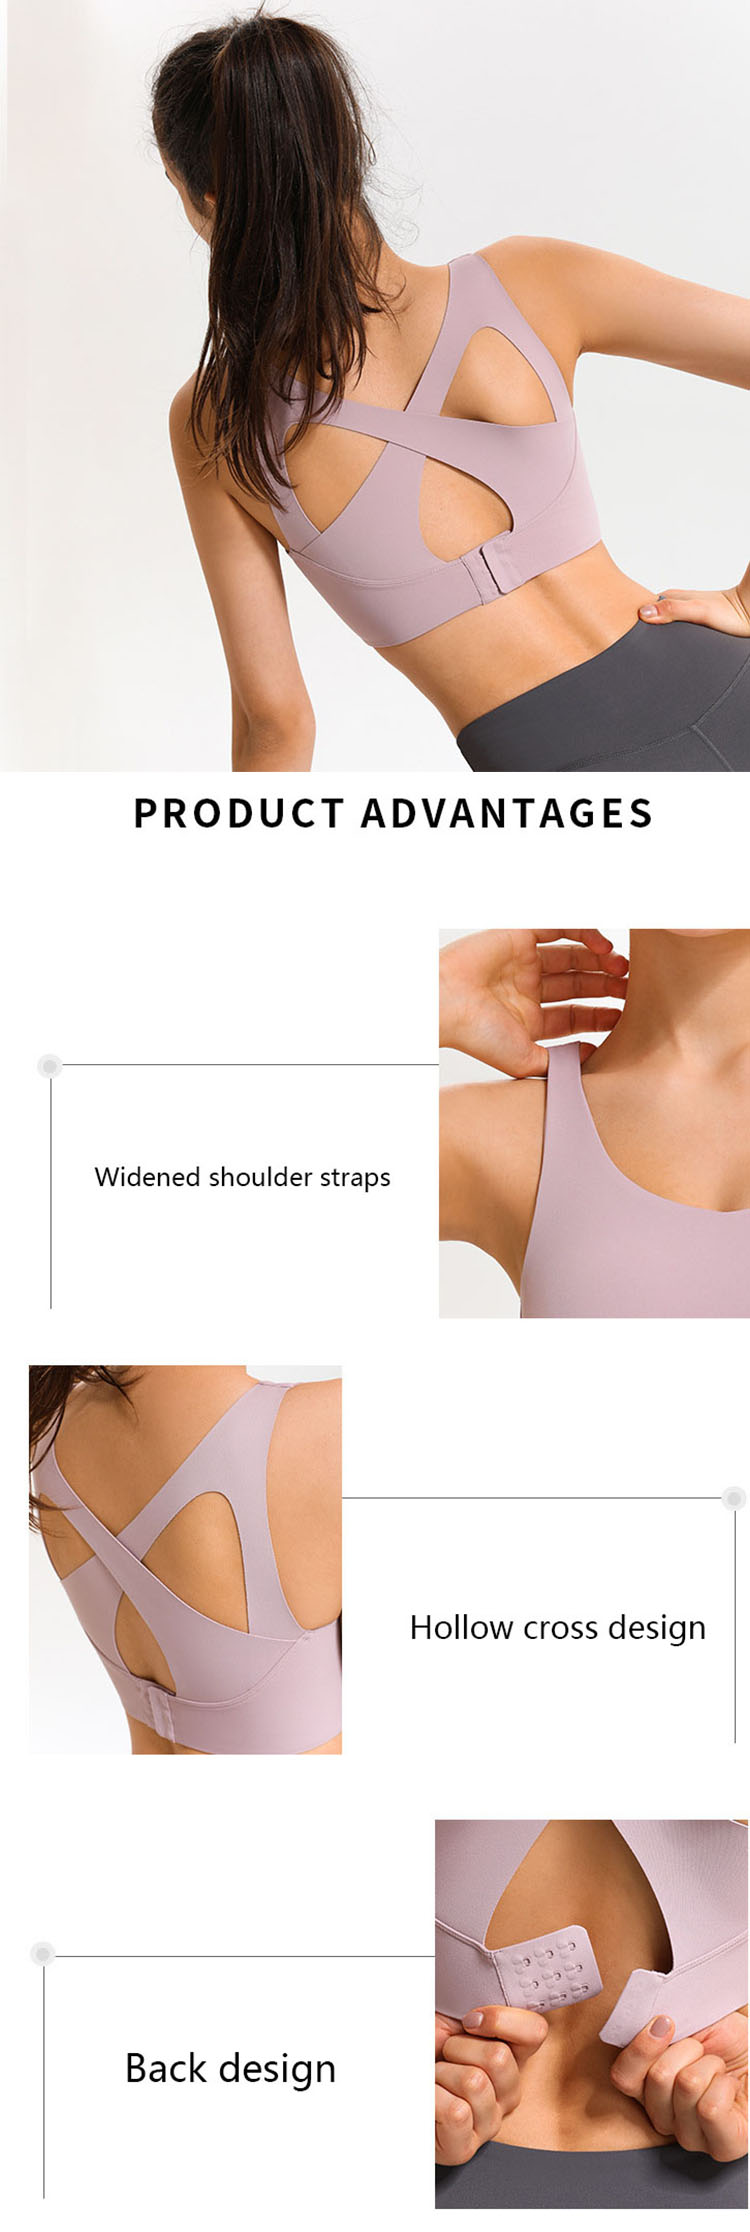 Best sports bra for large chest - Activewear manufacturer